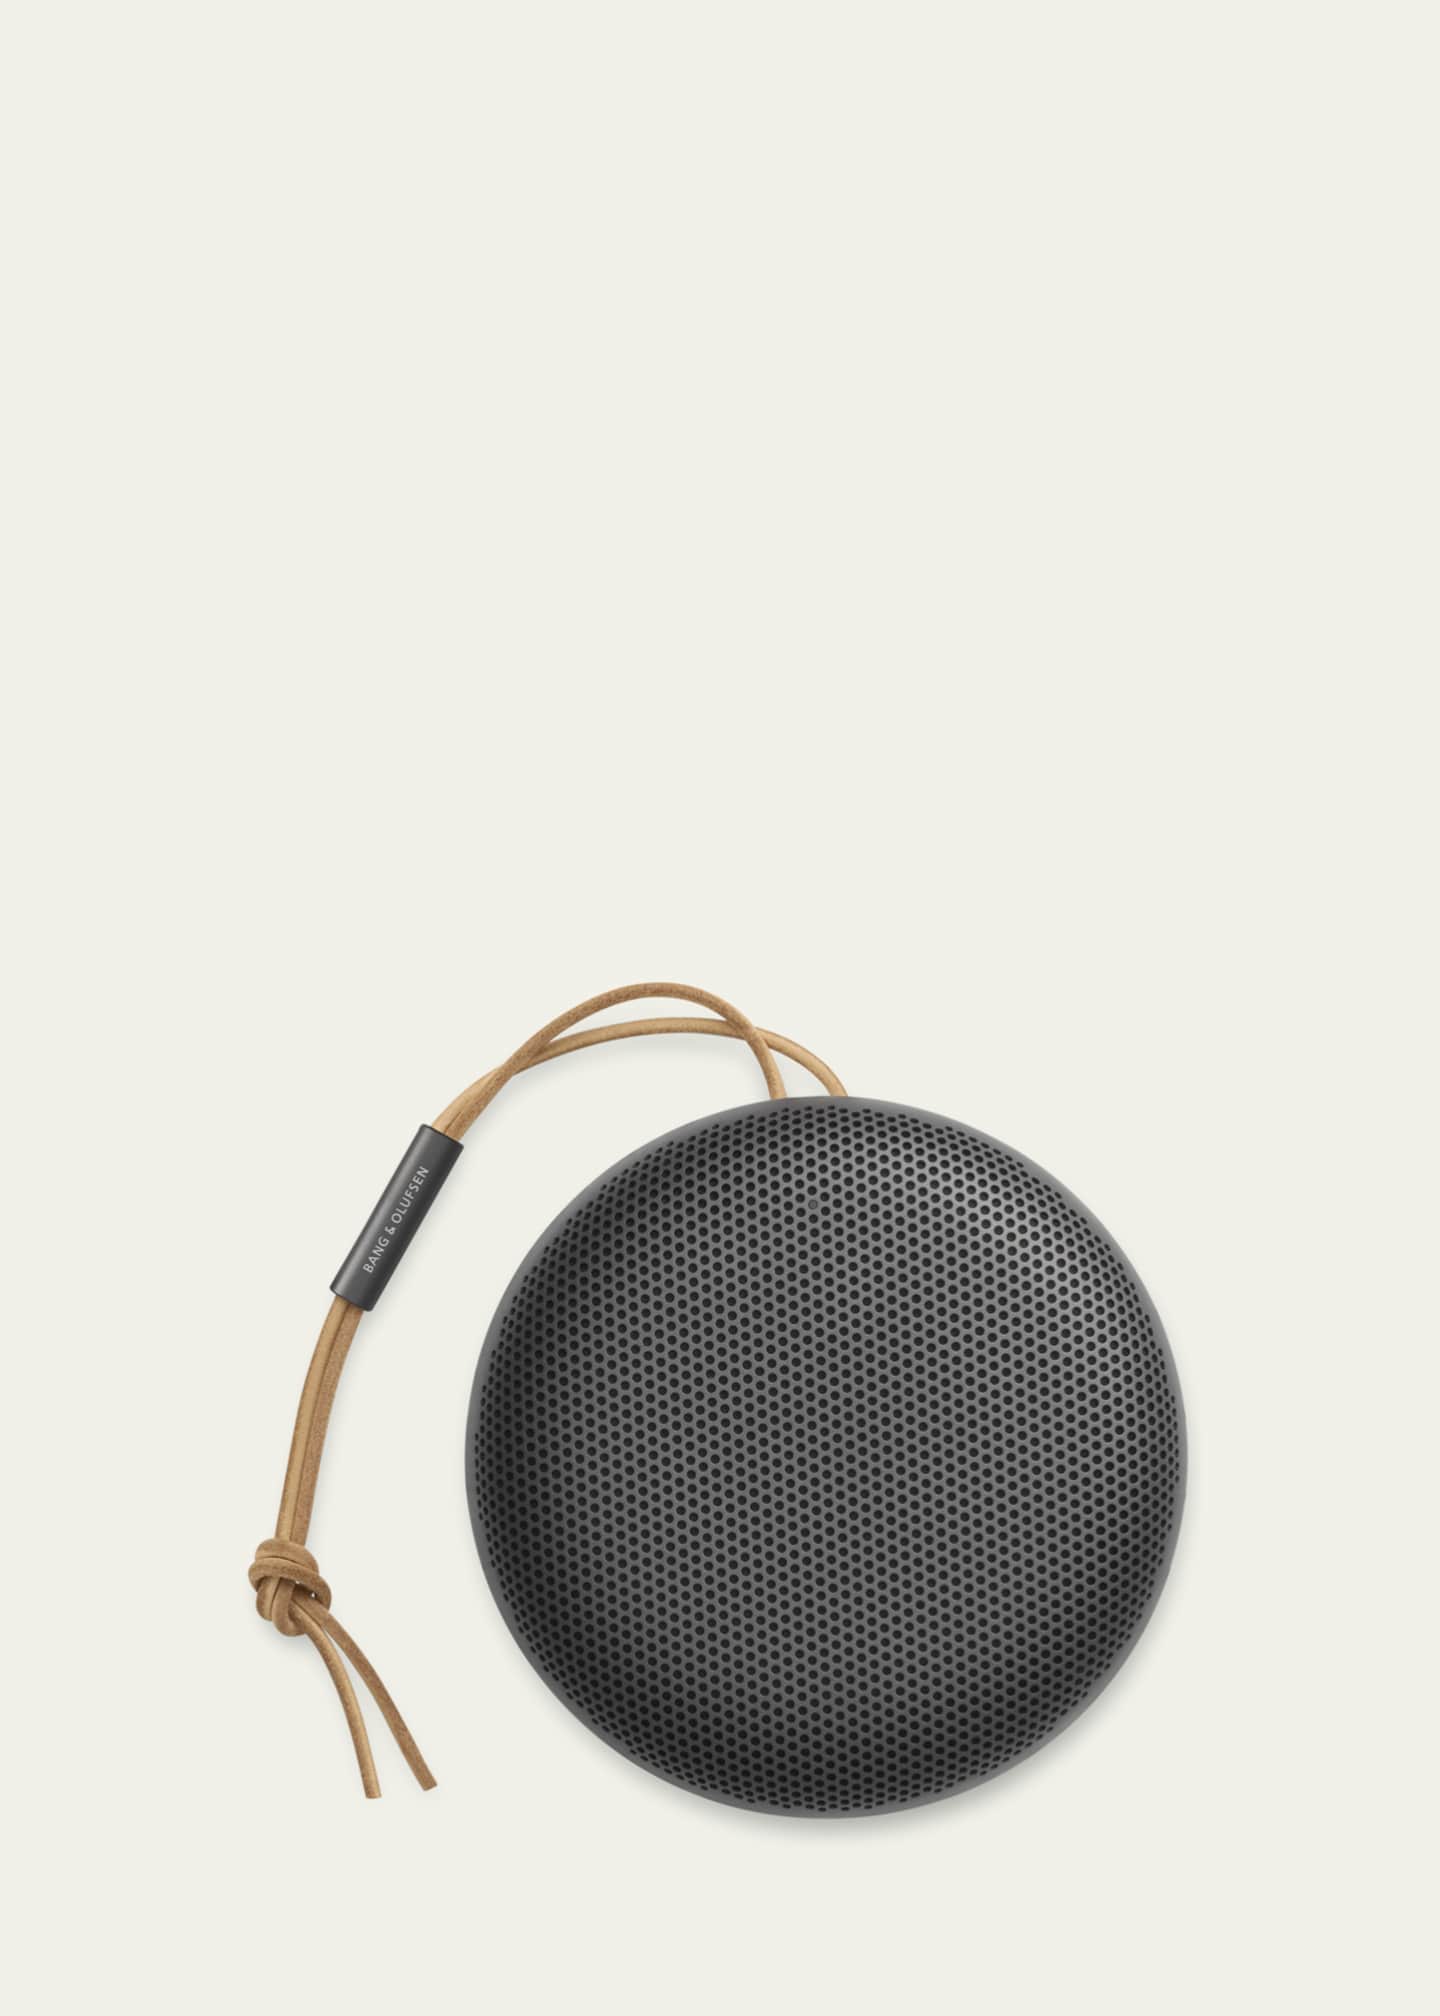 Bang & Olufsen BeoPlay A1 2nd Generation Speaker, Black